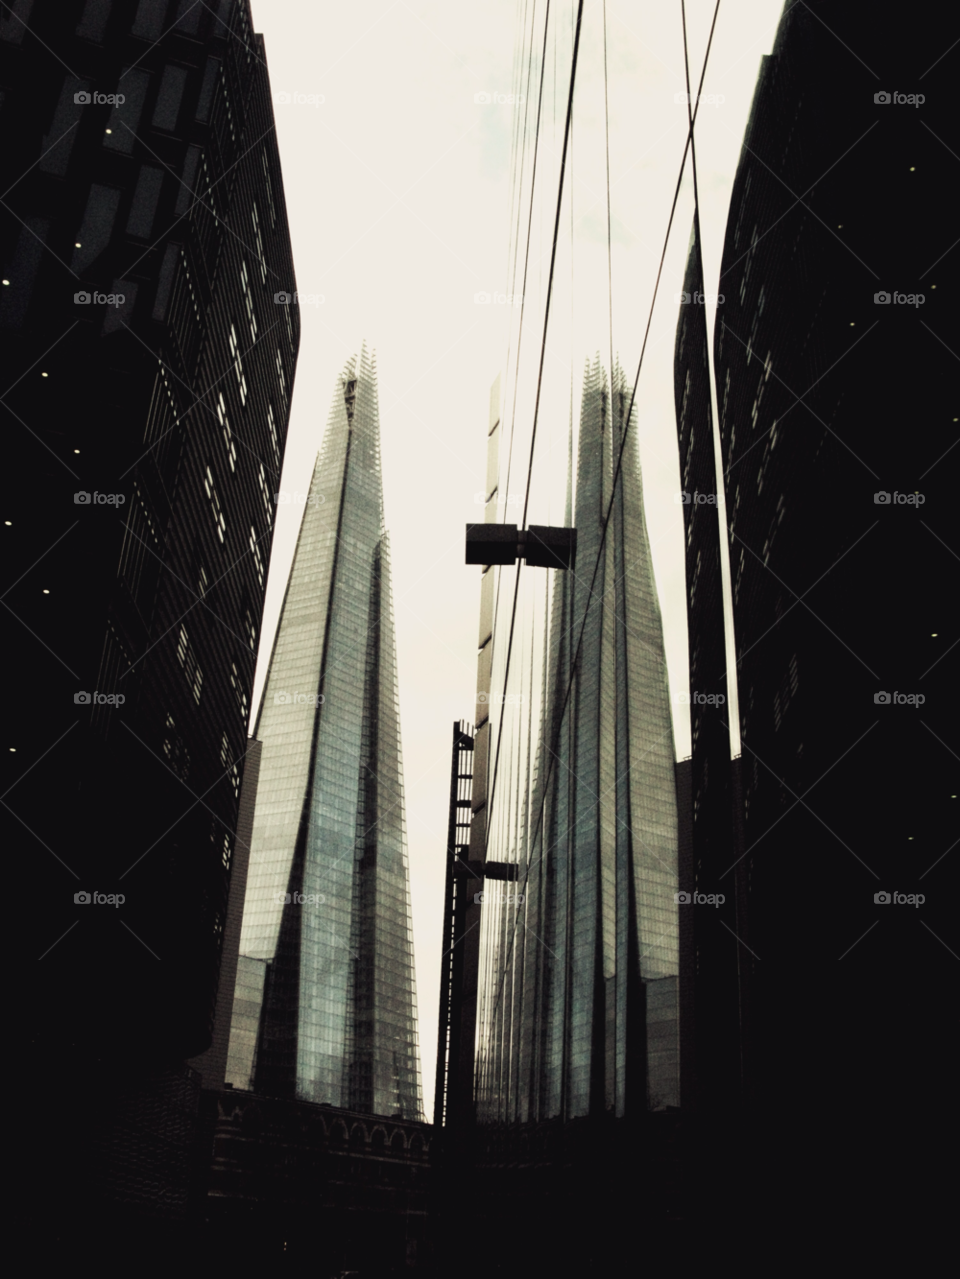 background glass london england by Carlos